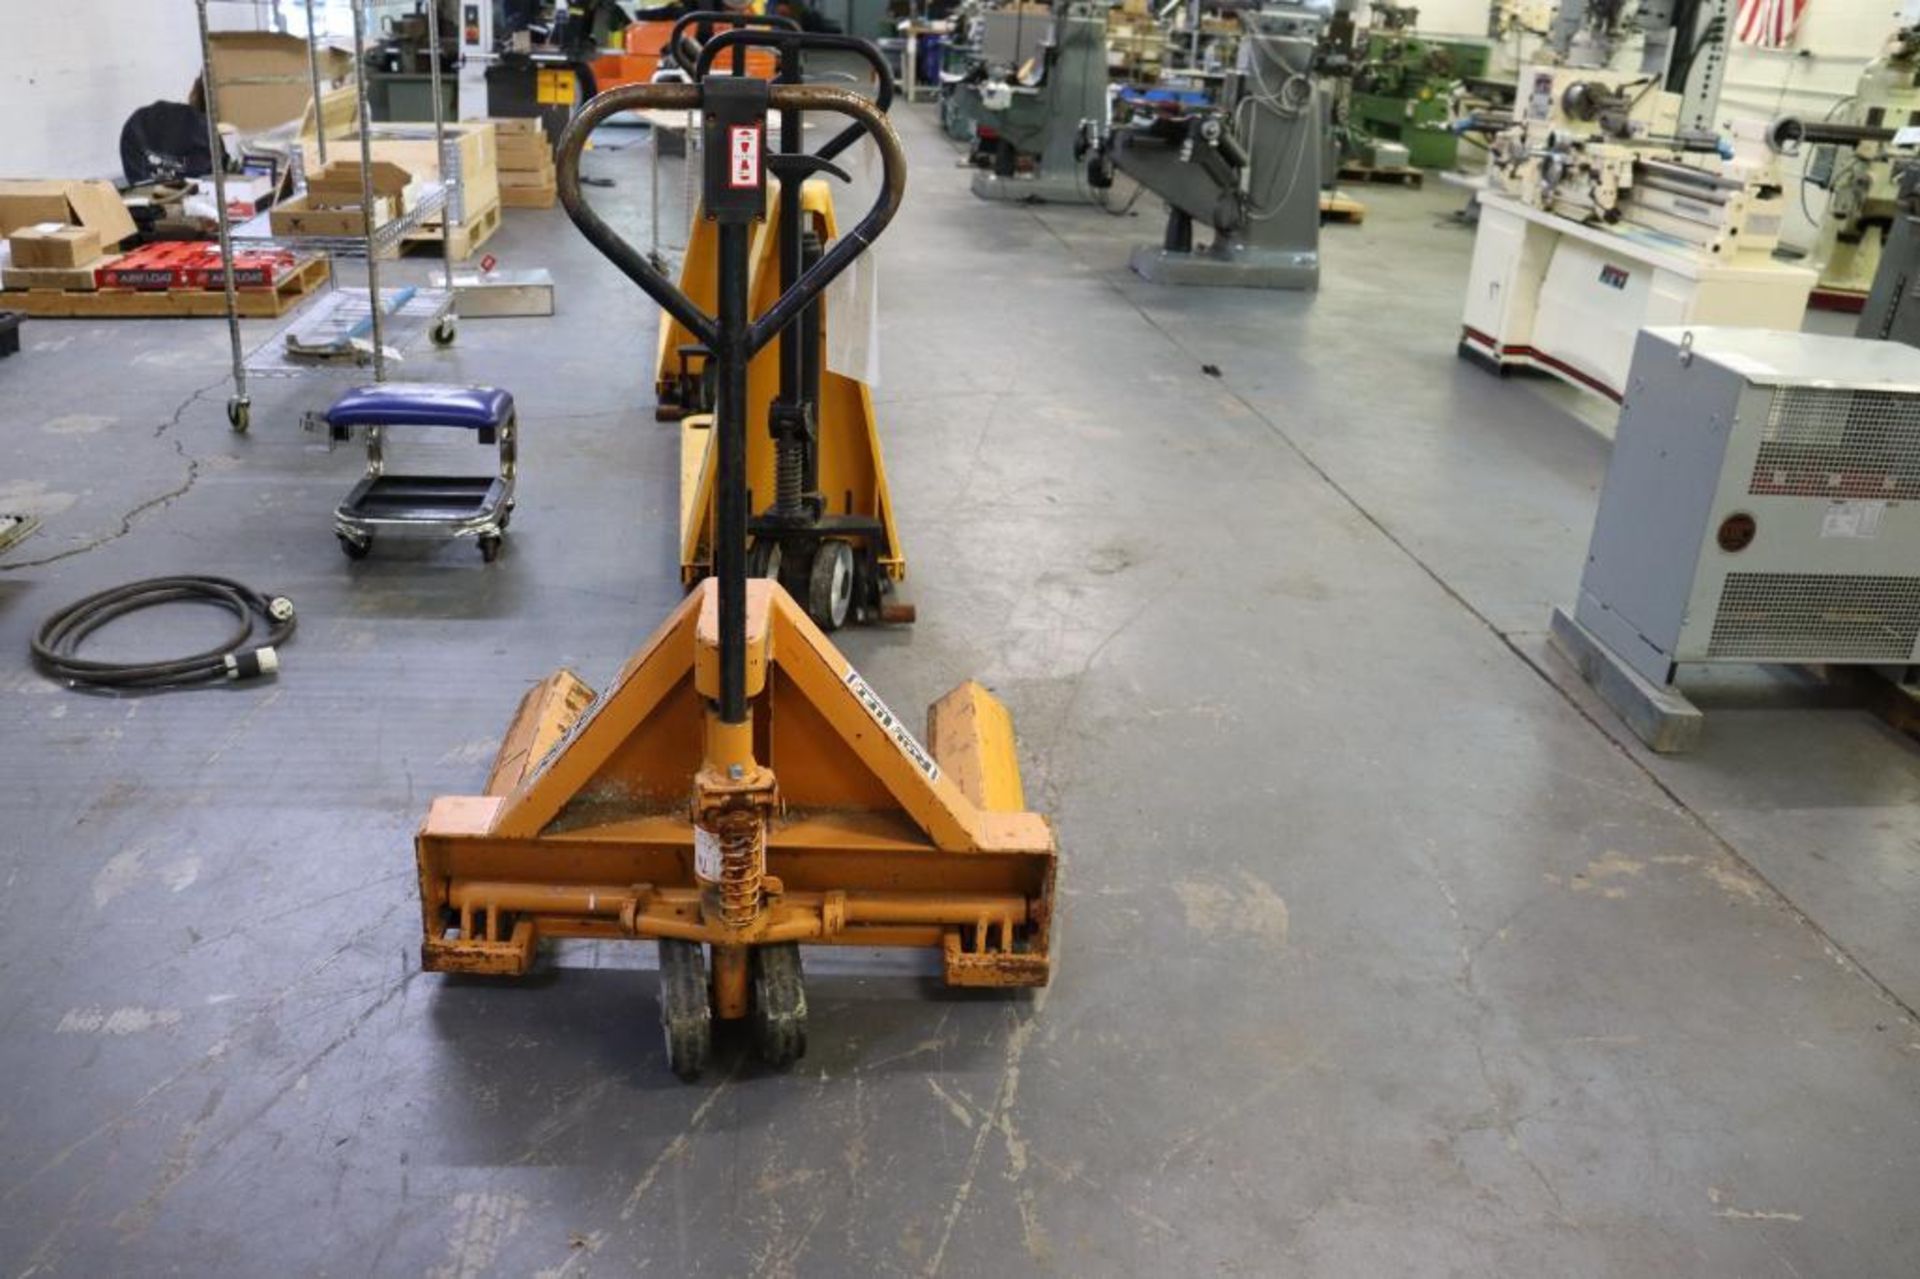 Presto 5500lbs roll moving pallet jack - Image 3 of 8